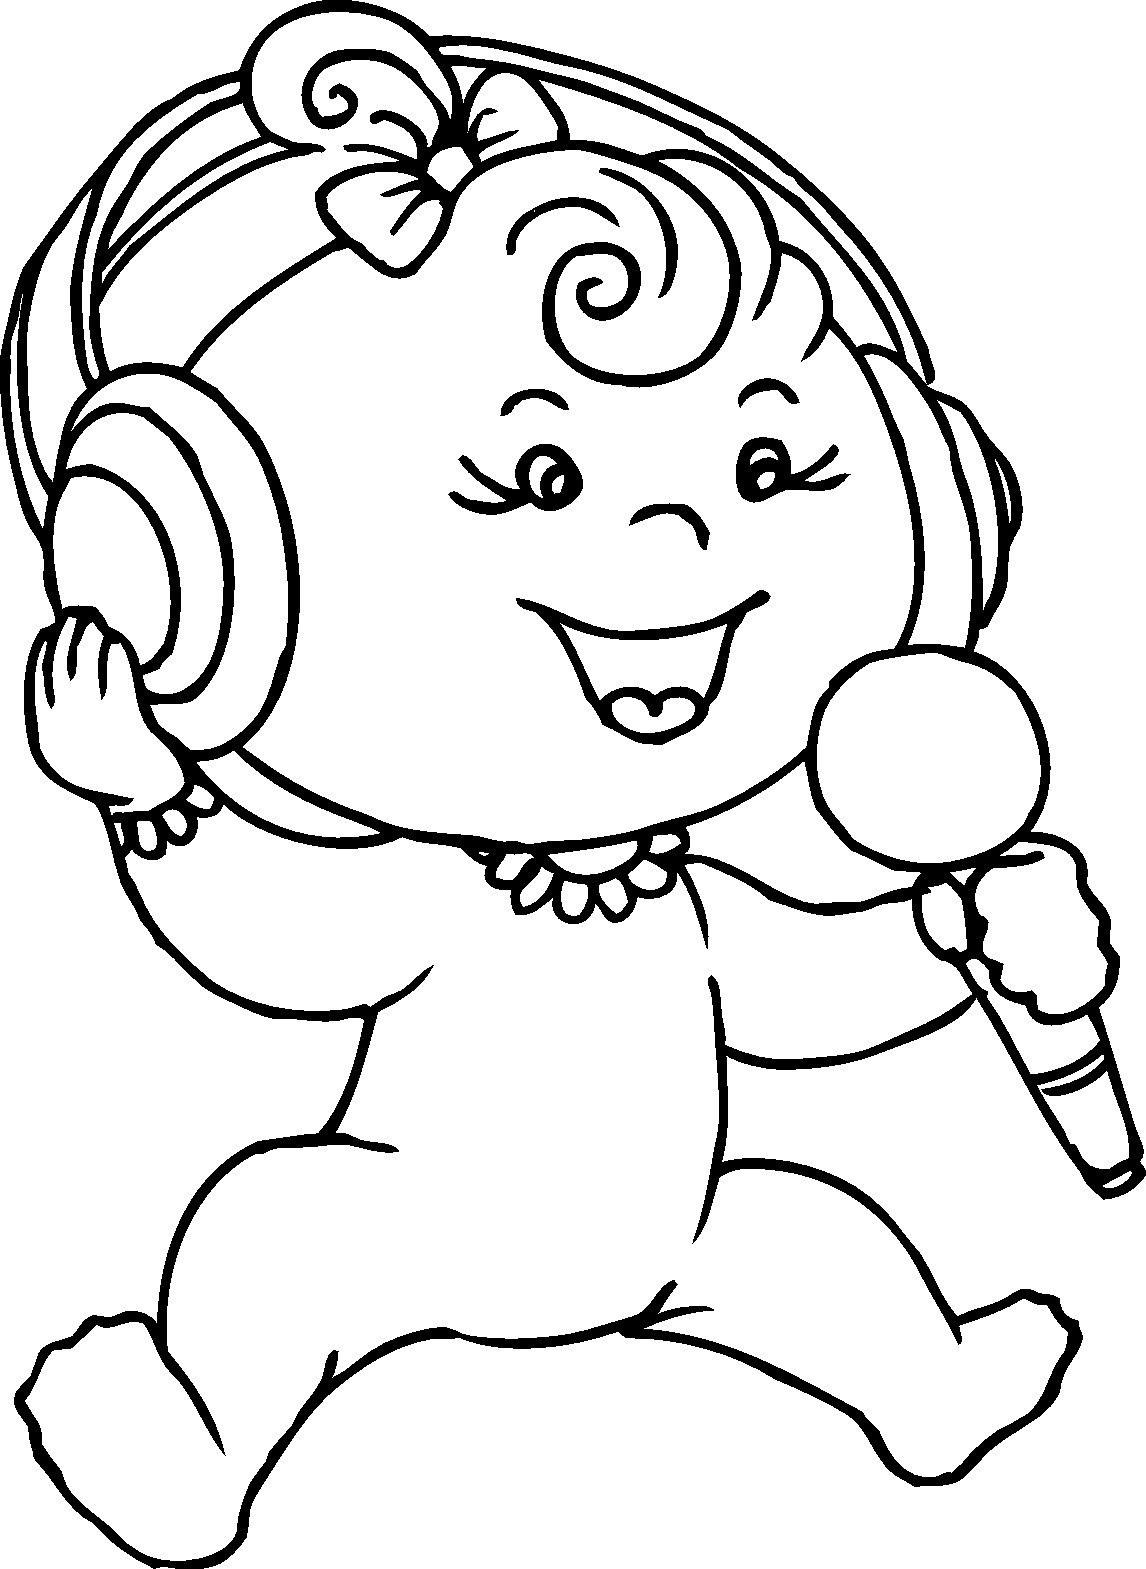 Coloring Sheets For Girls And Boys
 boy and girl coloring pages